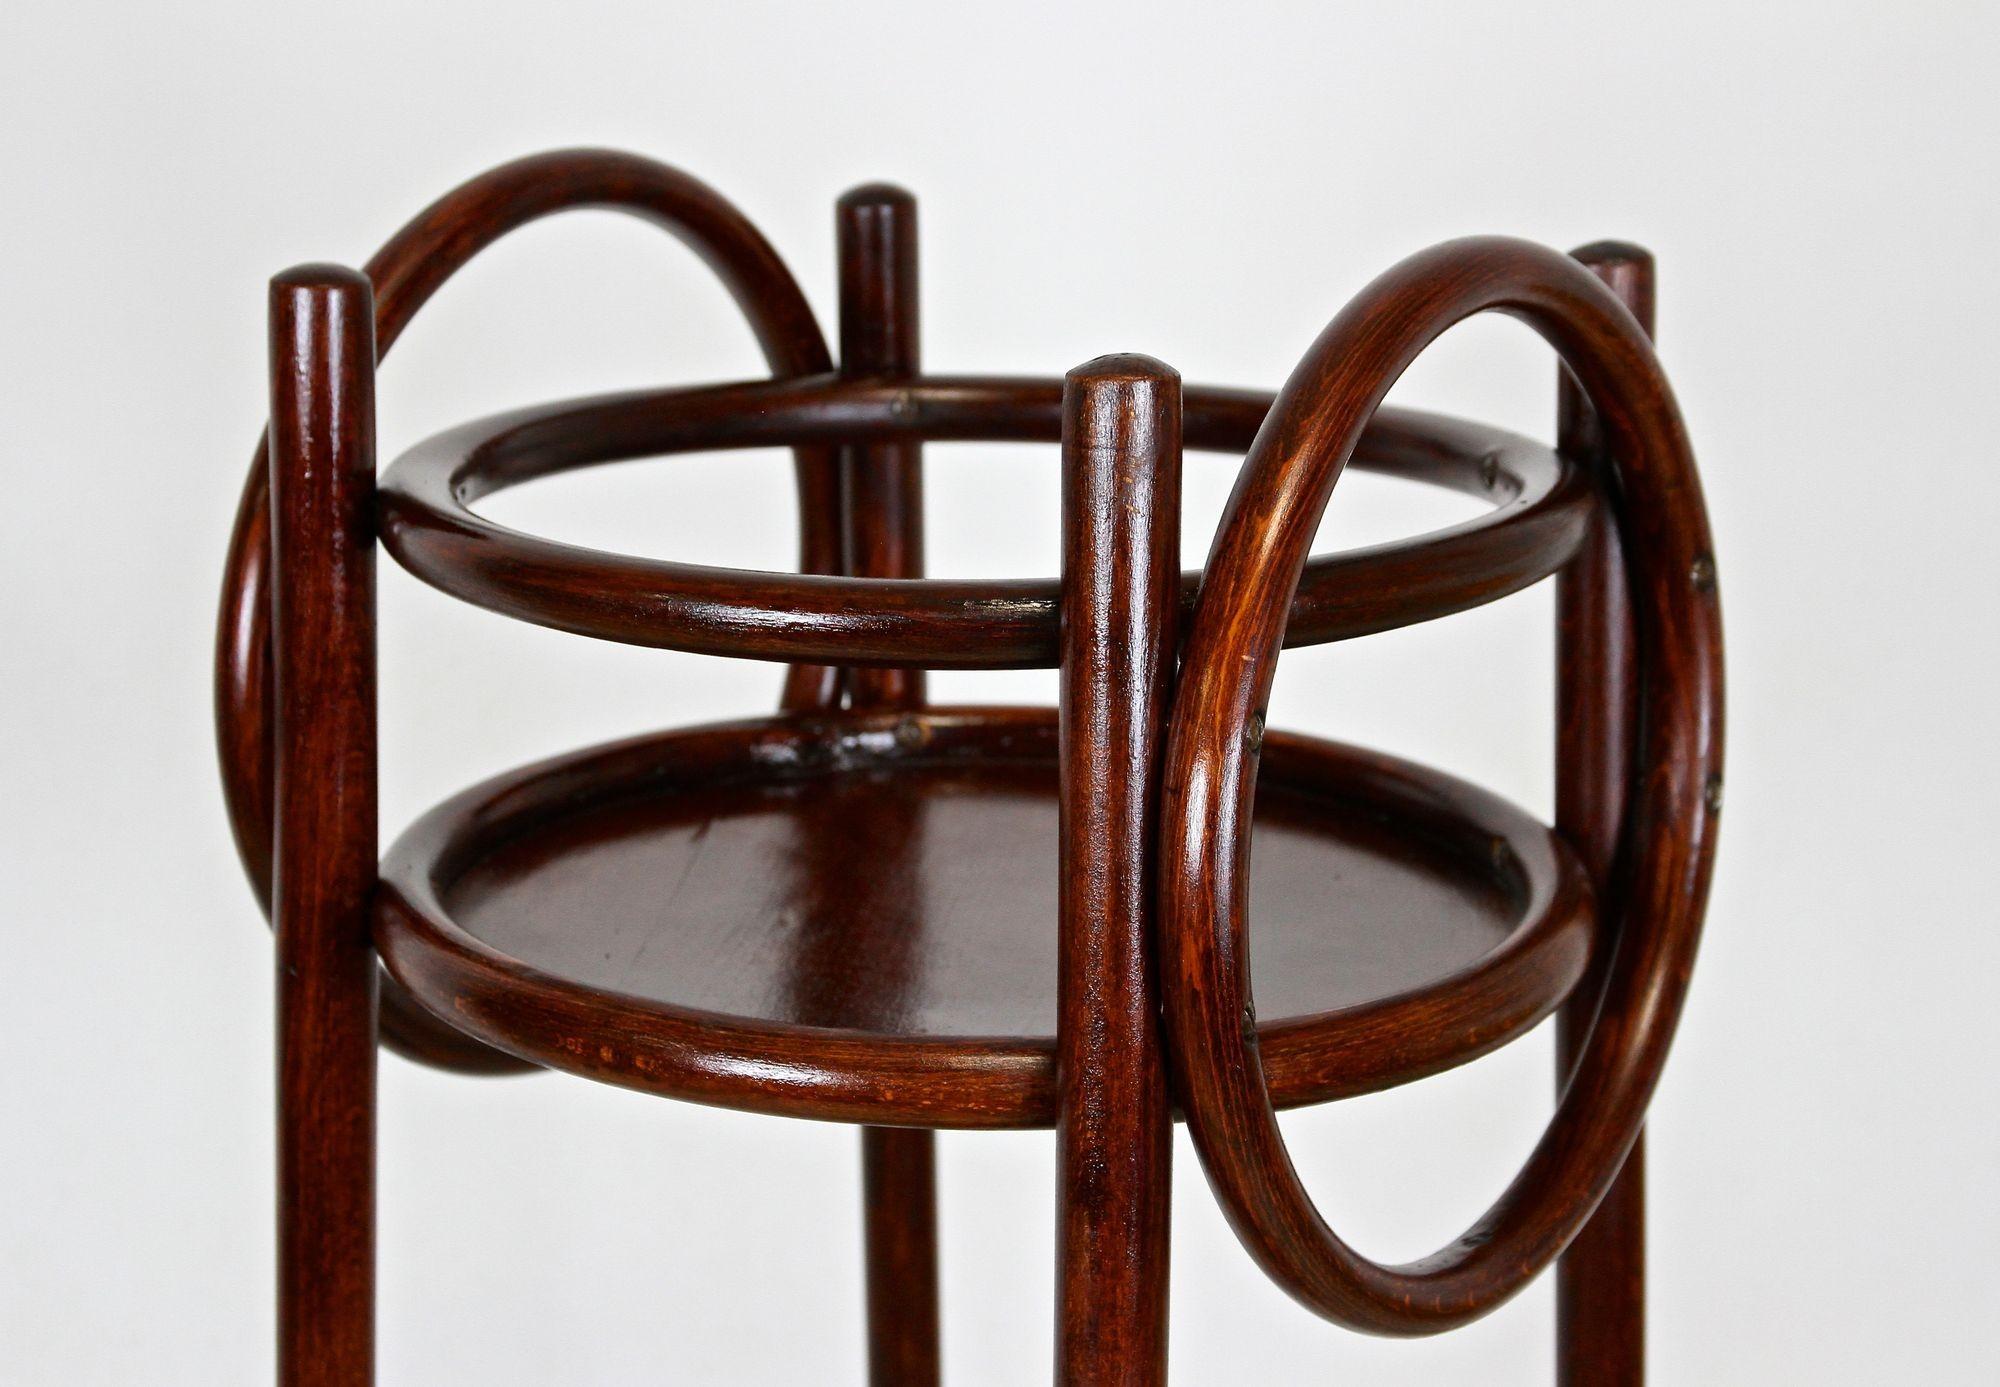 Unusual bentwood pedestal or plant stand made by the famous company of Thonet in Vienna around 1906. This artfully designed early 20th century pedestal provides two round levels connected by delicate beechwood columns. The upper compartment is